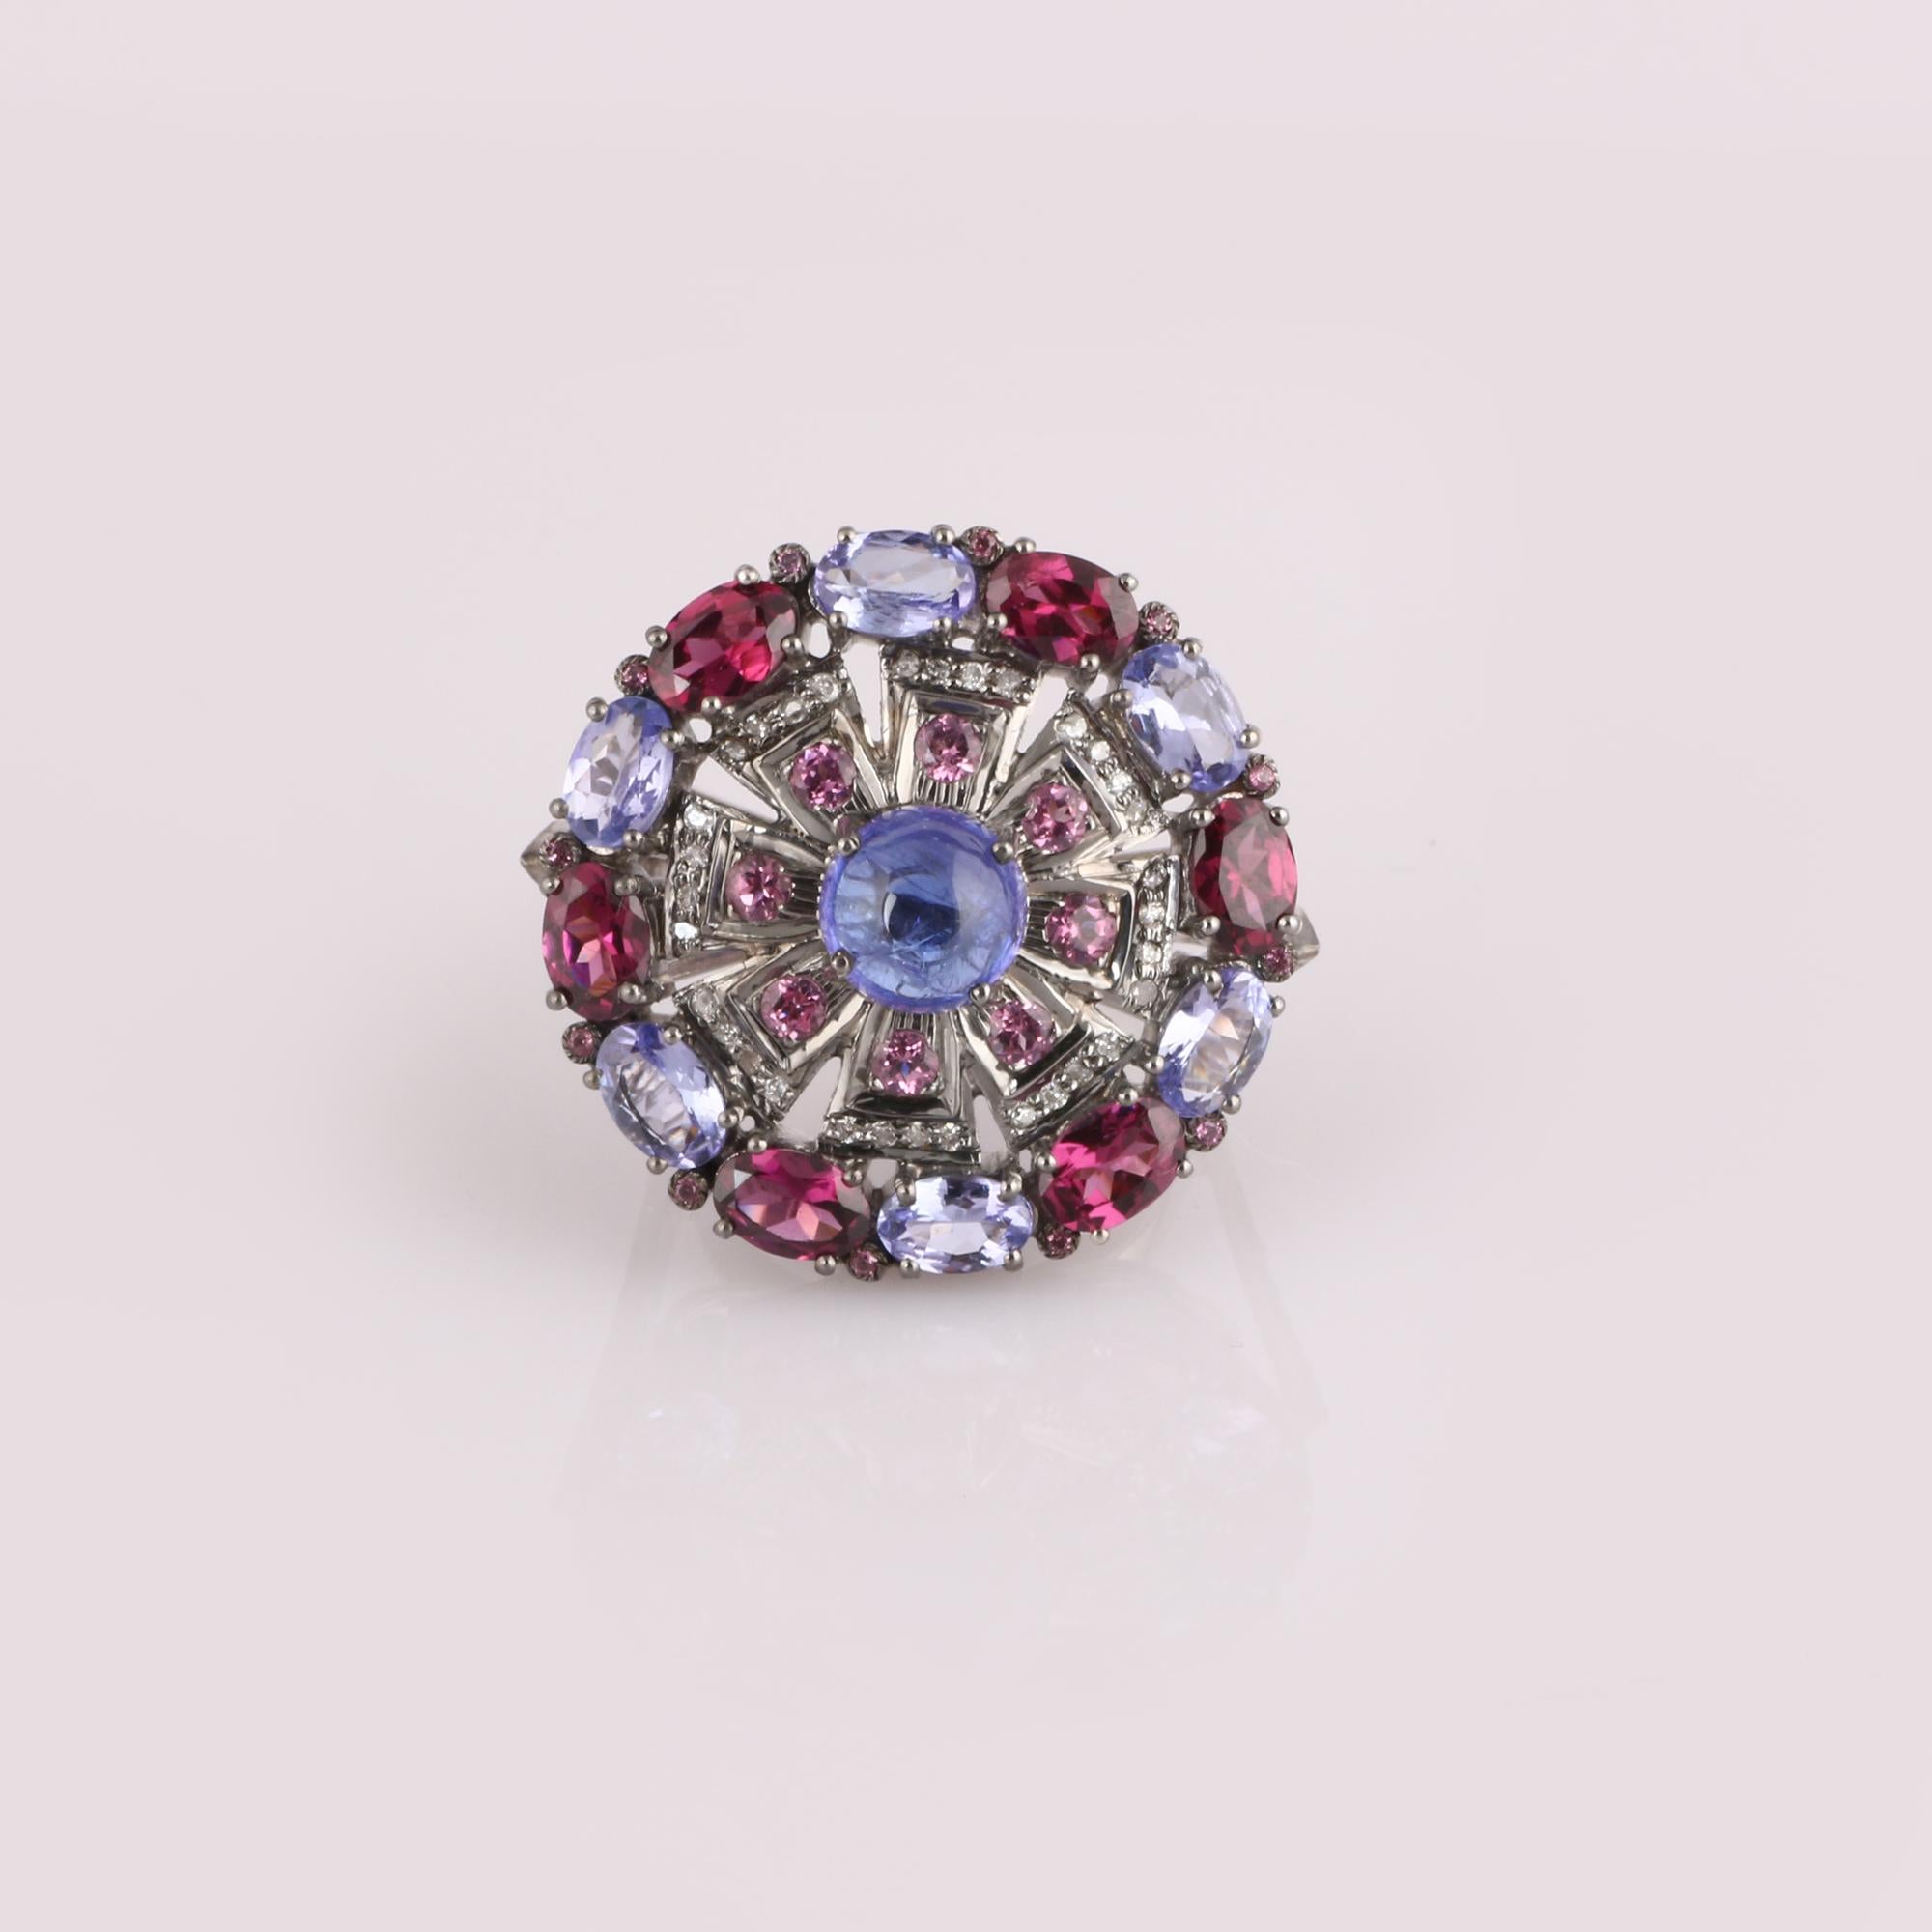 Item details:-

✦ SKU:- ESRG00217

✦ Material :- 925 Sterling Silver
✦ Gemstone Specification:-
✧ Diamond
✧ Tanzanite, Rubellite

✦ Approx. Diamond Weight : 0.35
✦ Approx. Silver Weight : 11.59
✦ Approx. Gross Weight : 14.12

Ring Size (US): 7

You